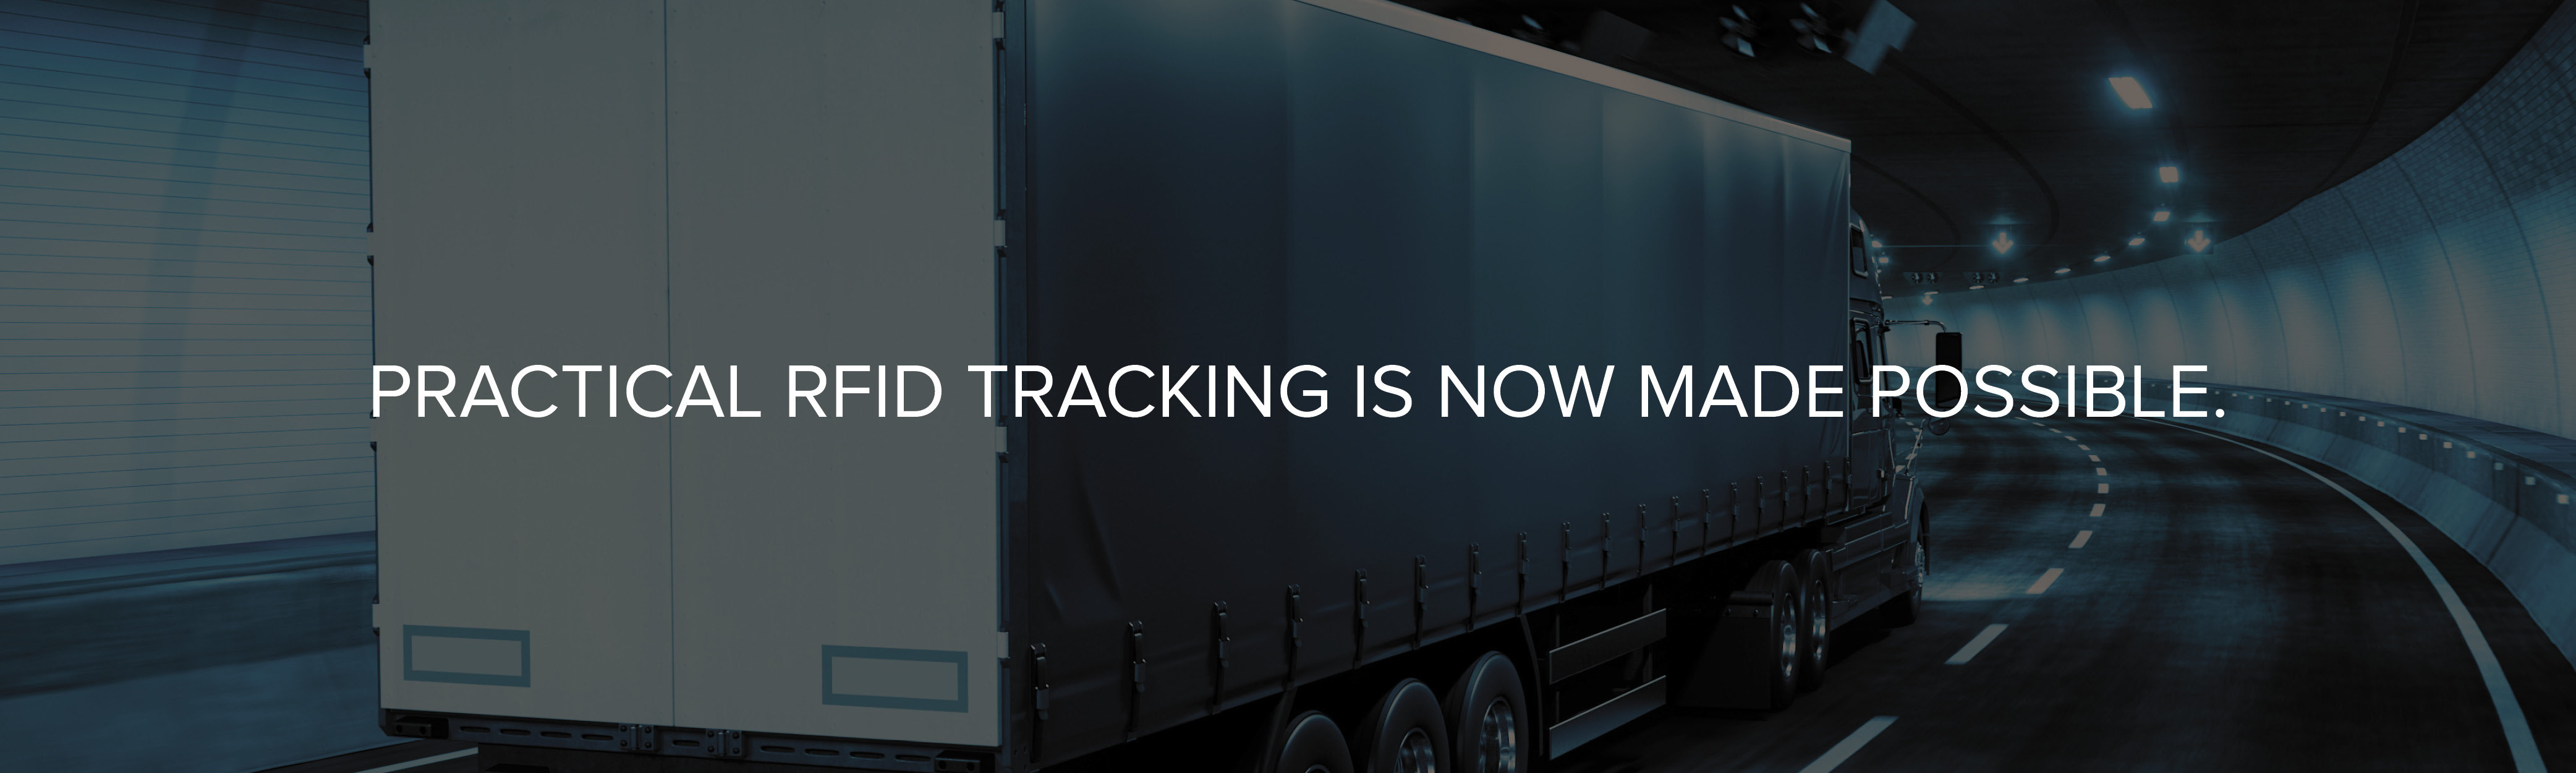 PRACTICAL RFID TRACKING IS NOW MADE POSSIBLE.